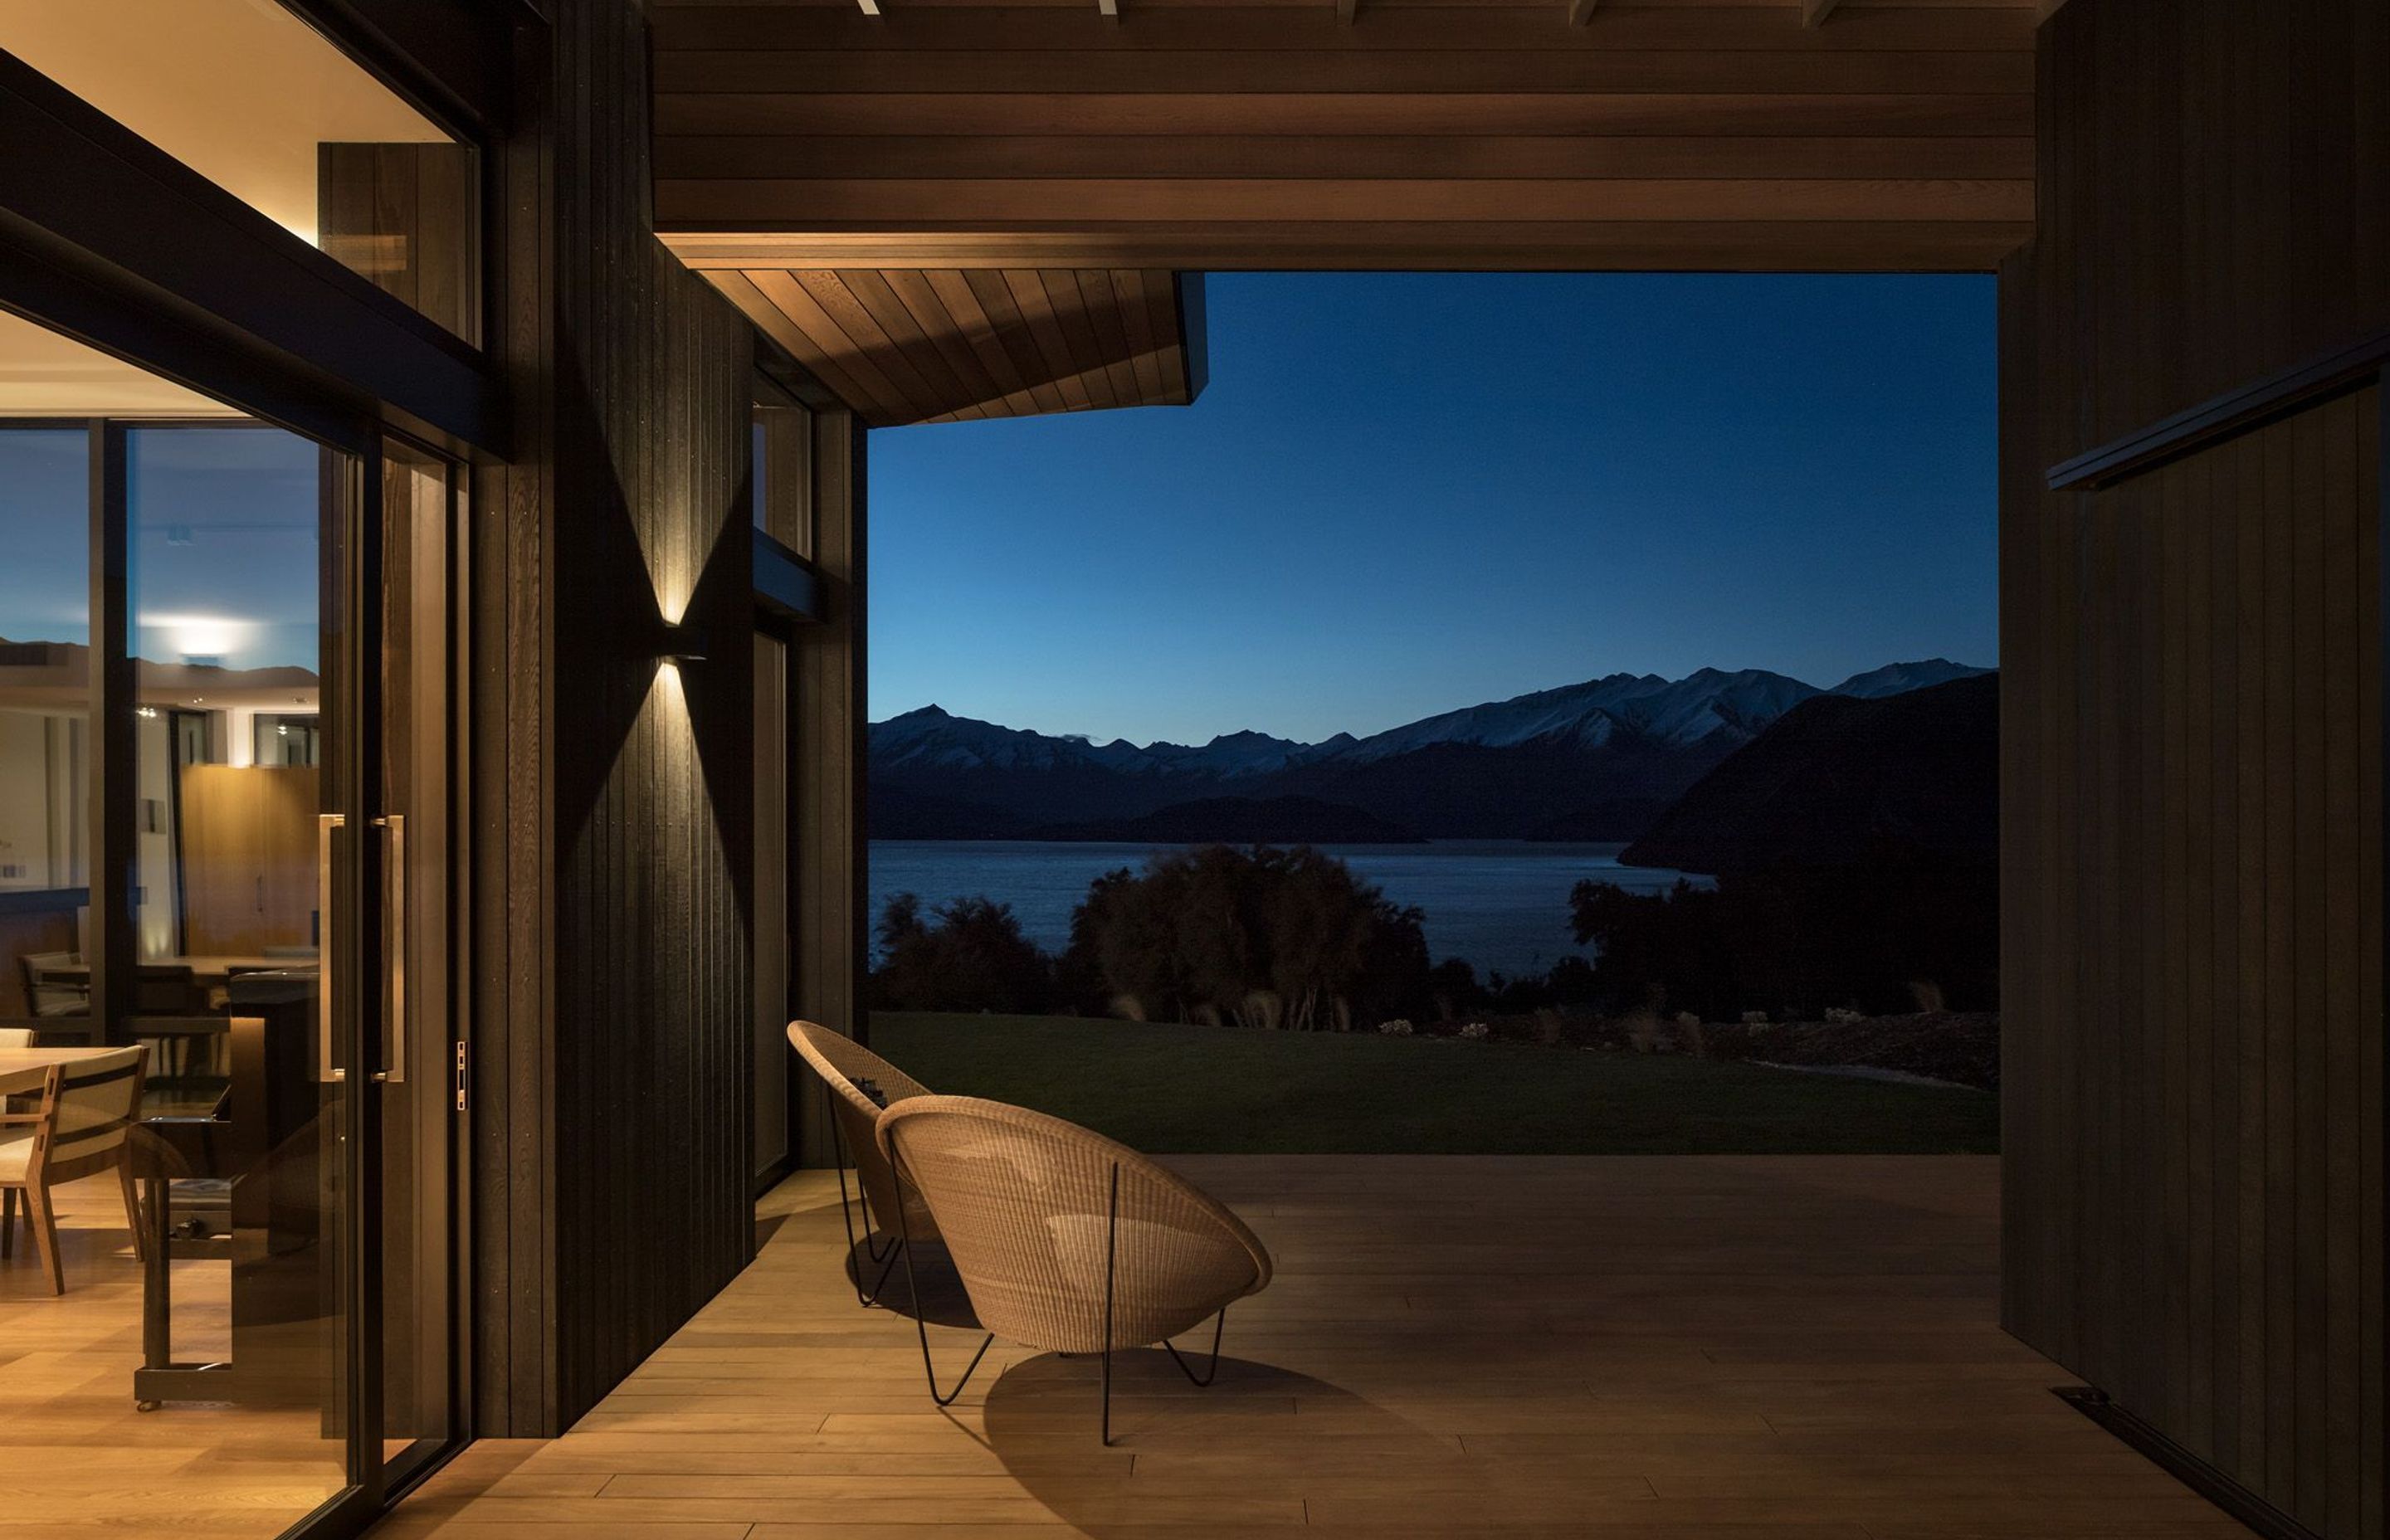 Rooms look through other rooms to capture views beyond.  Corner openings, surface sliders, and pocket sliding doors re-shape rooms to extend their boundaries.